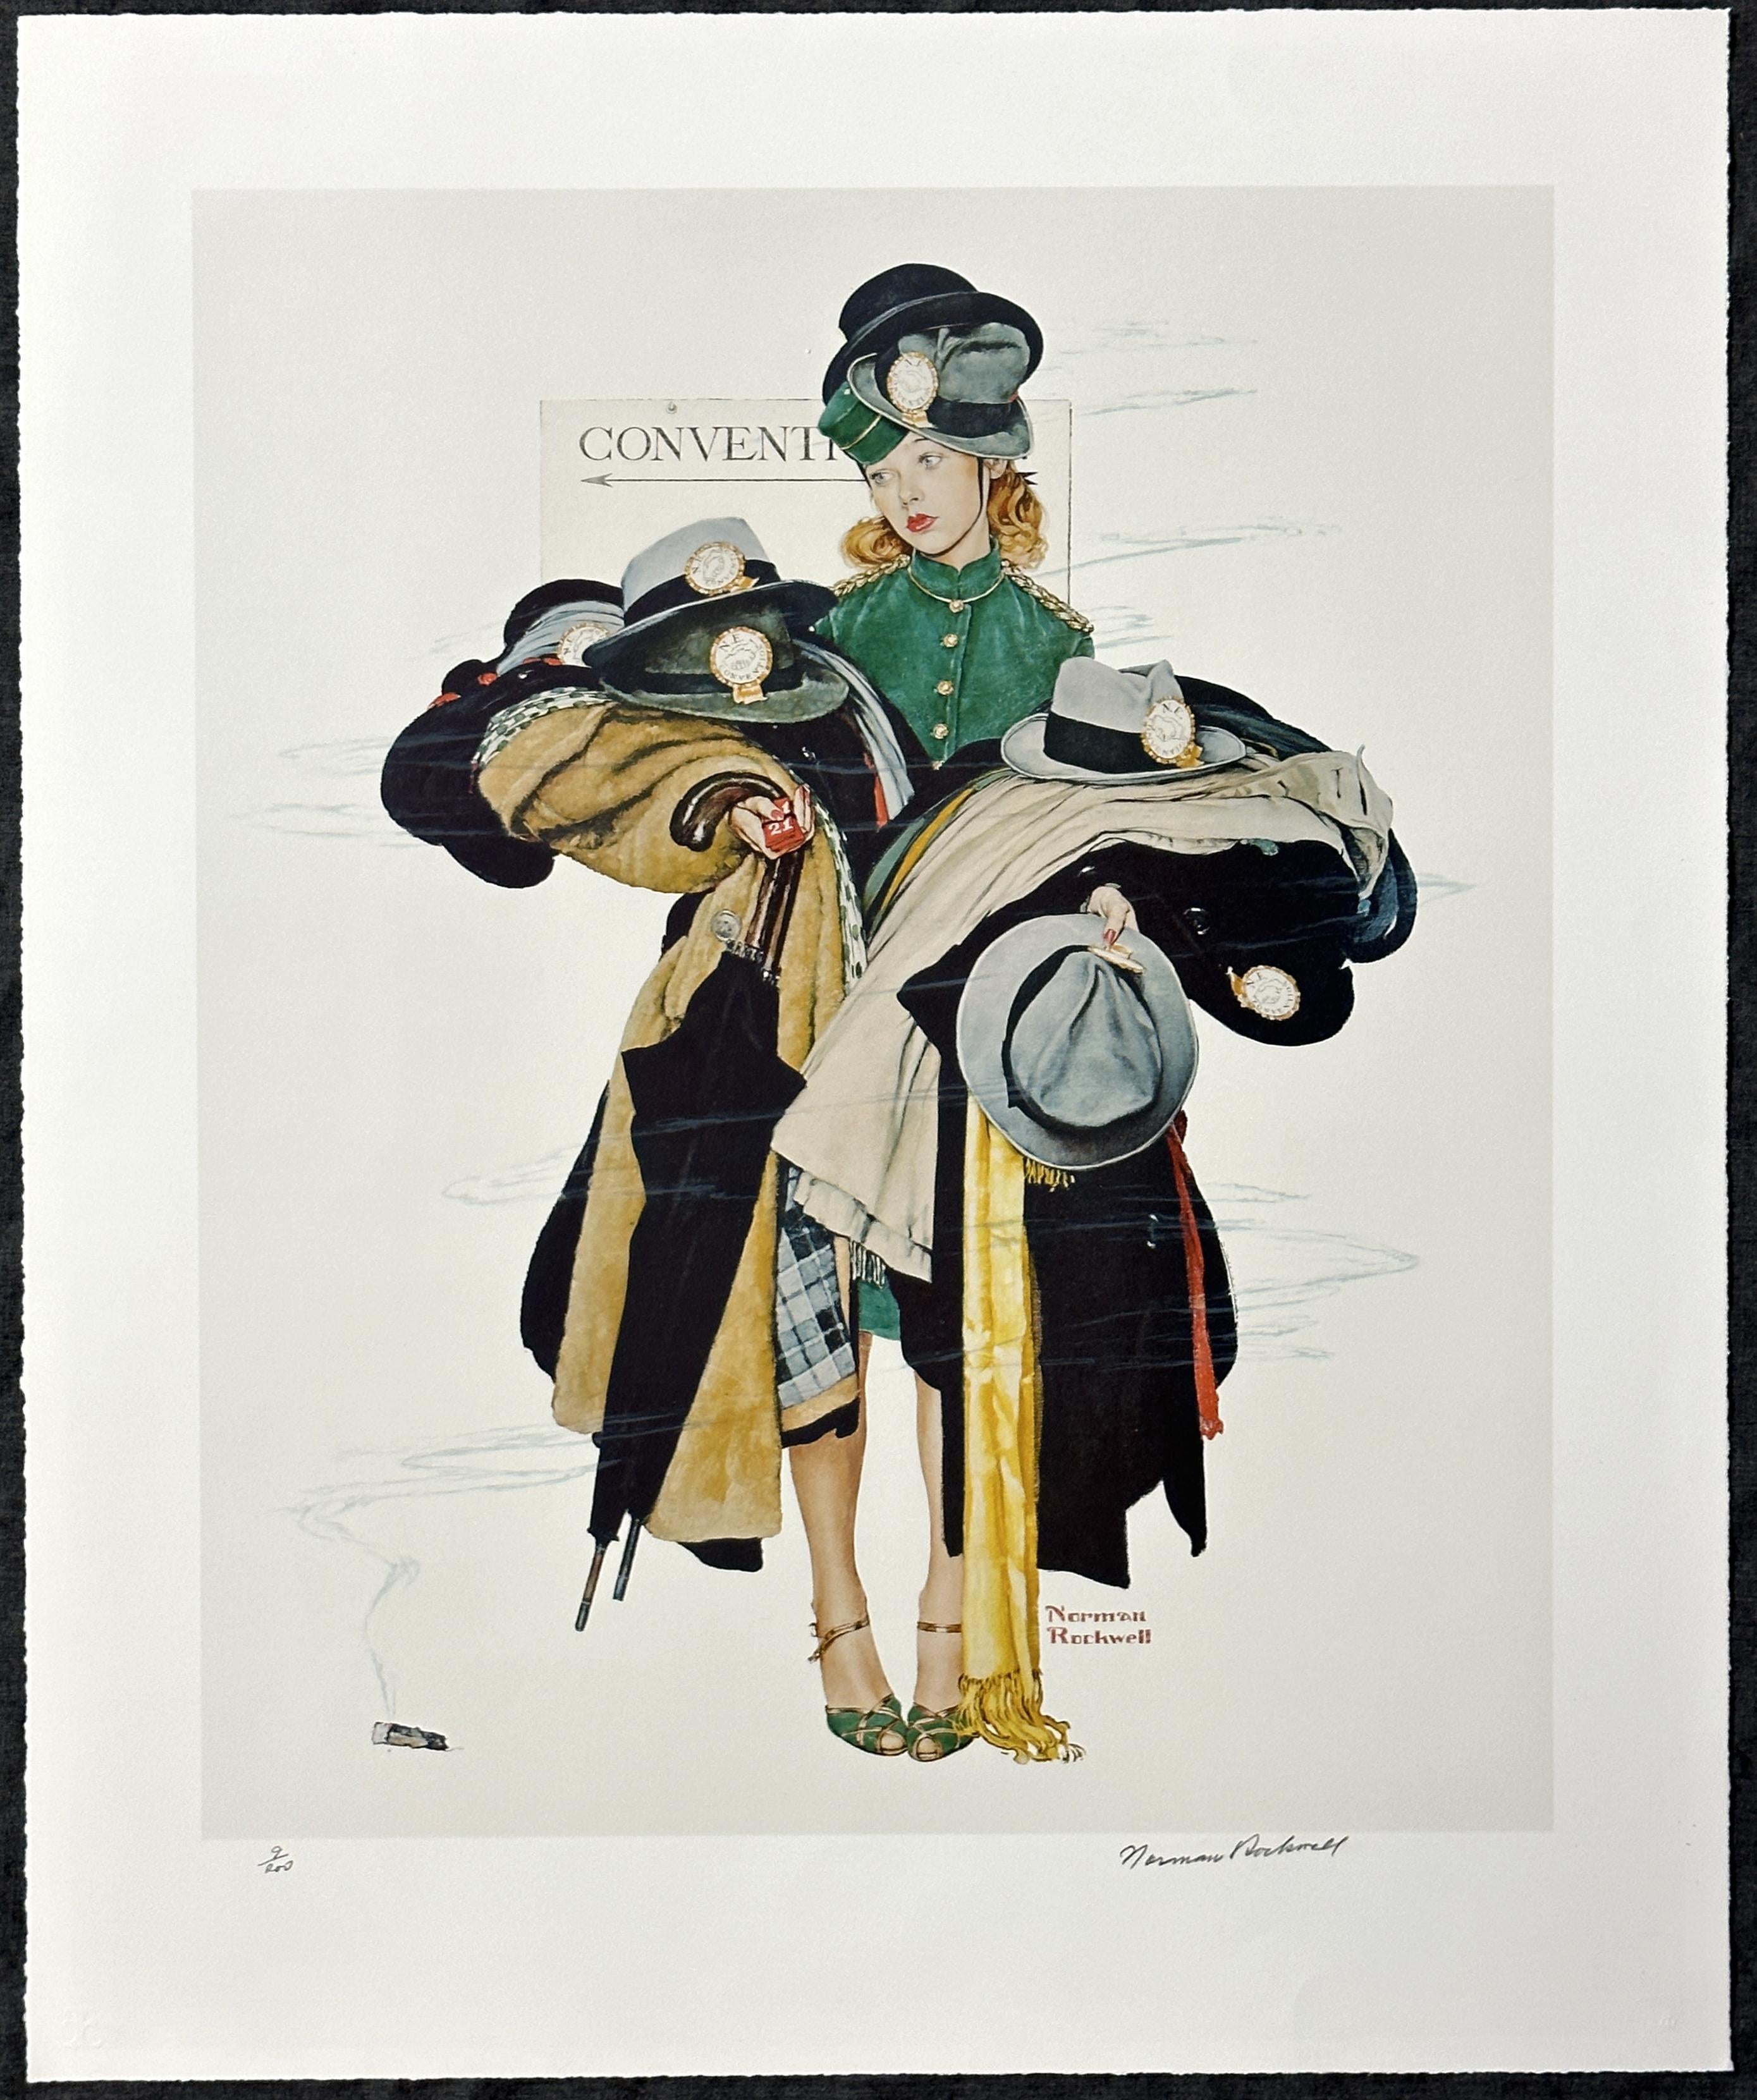 Convention, 1976 Signed Limited Edition 7-Color Collotype on Rives BFK Paper - Print by Norman Rockwell